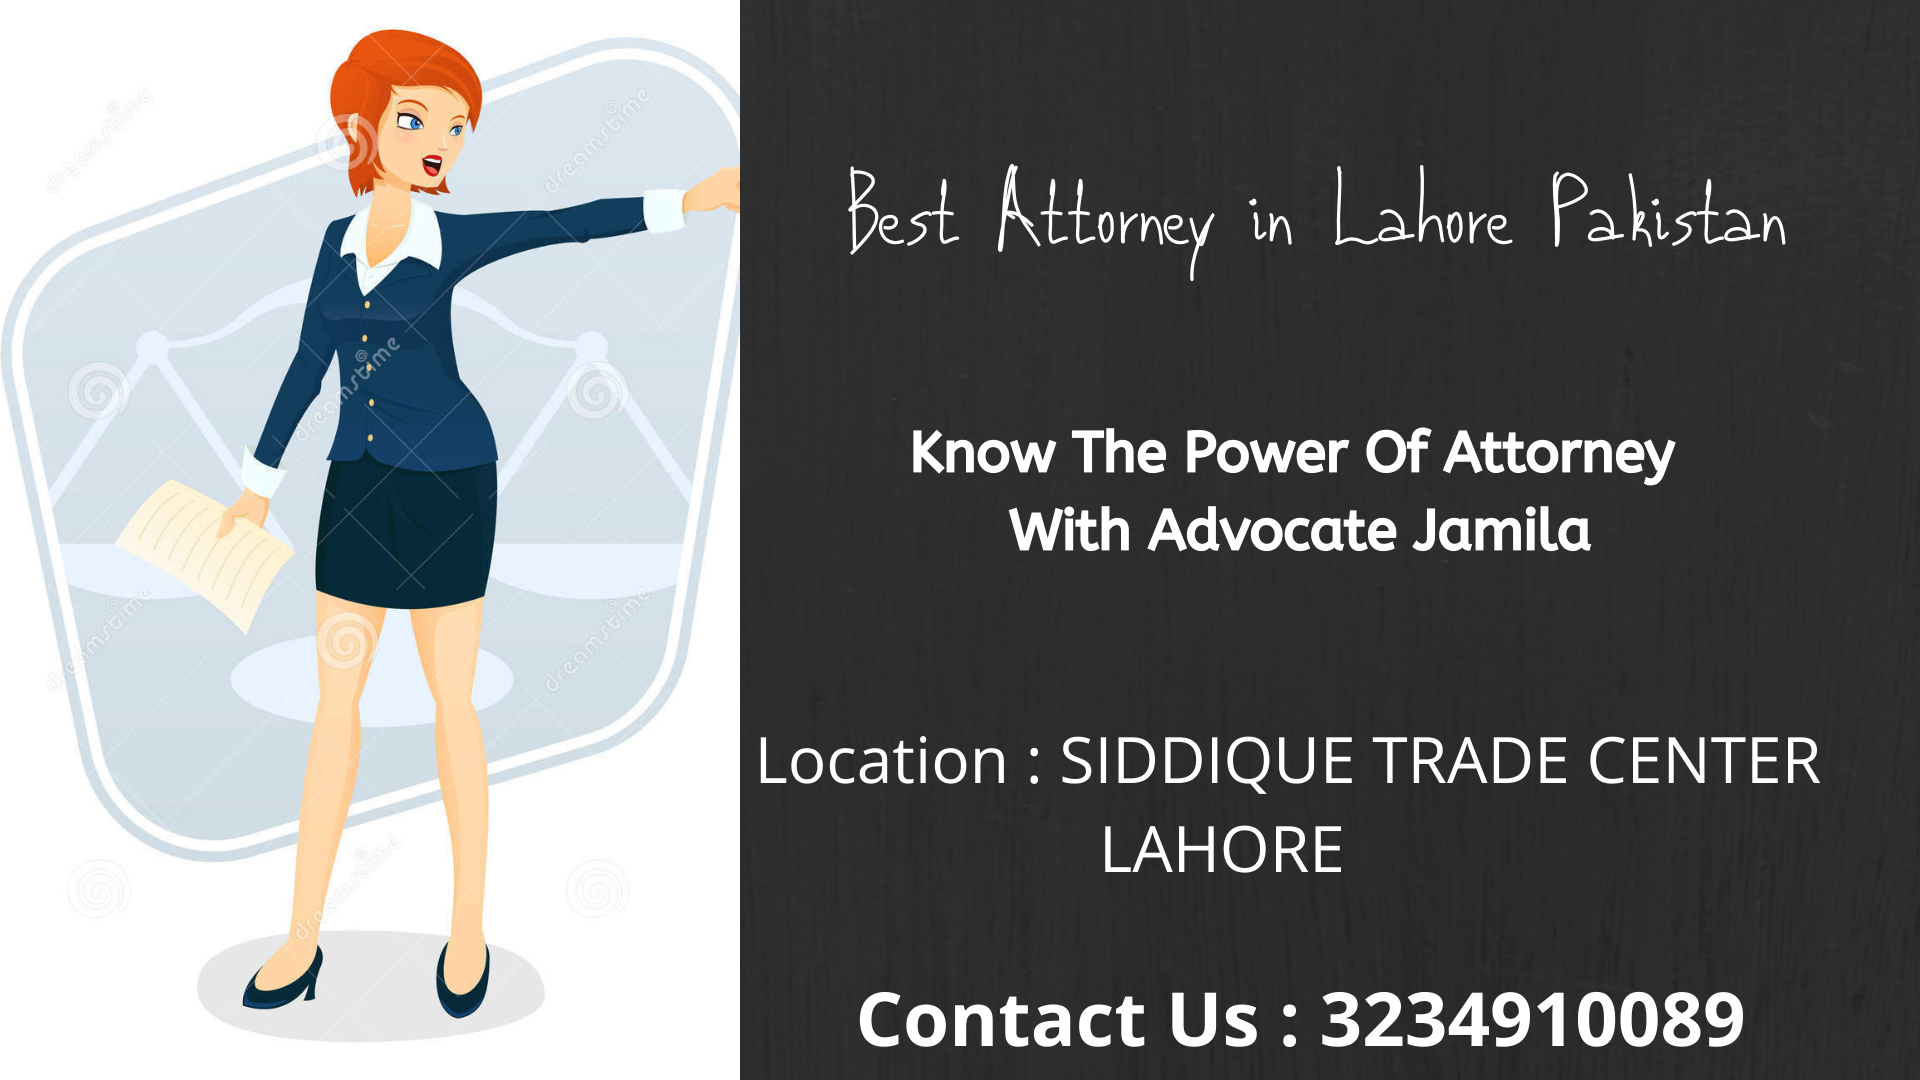 Best Attorney in Lahore Pakistan.png